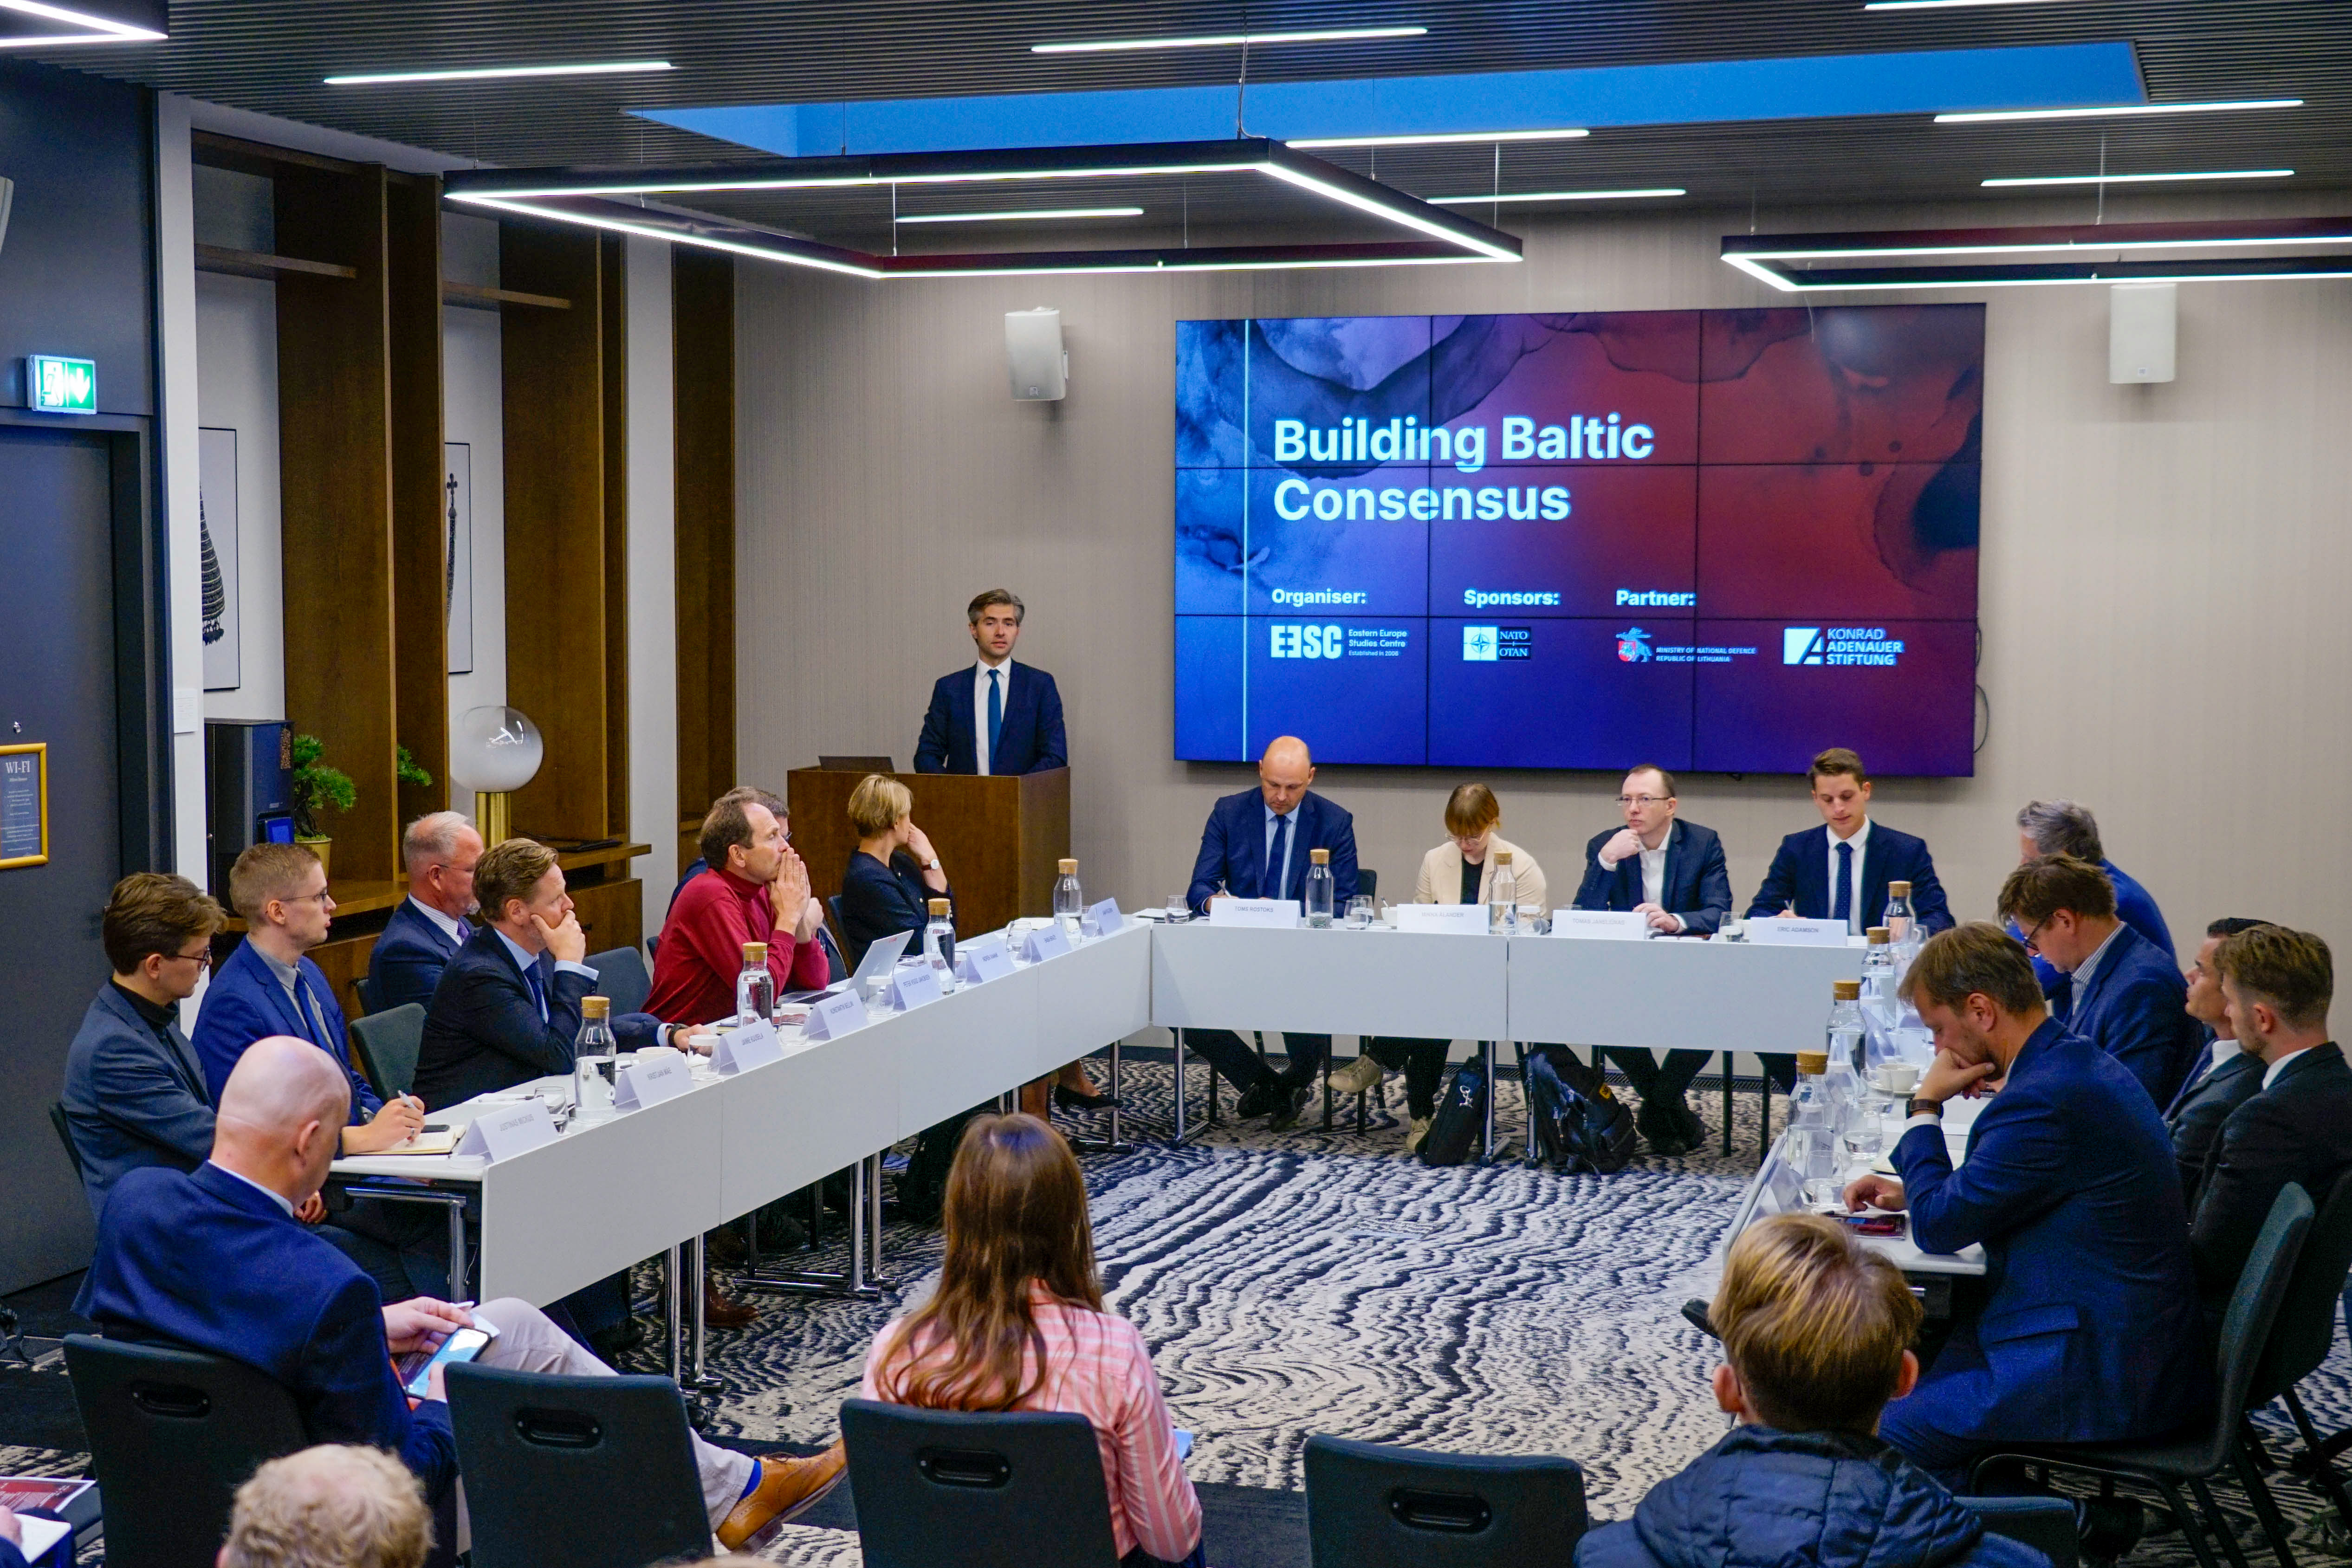 The Eastern Europe Studies Centre hosted the event Building Baltic Consensus